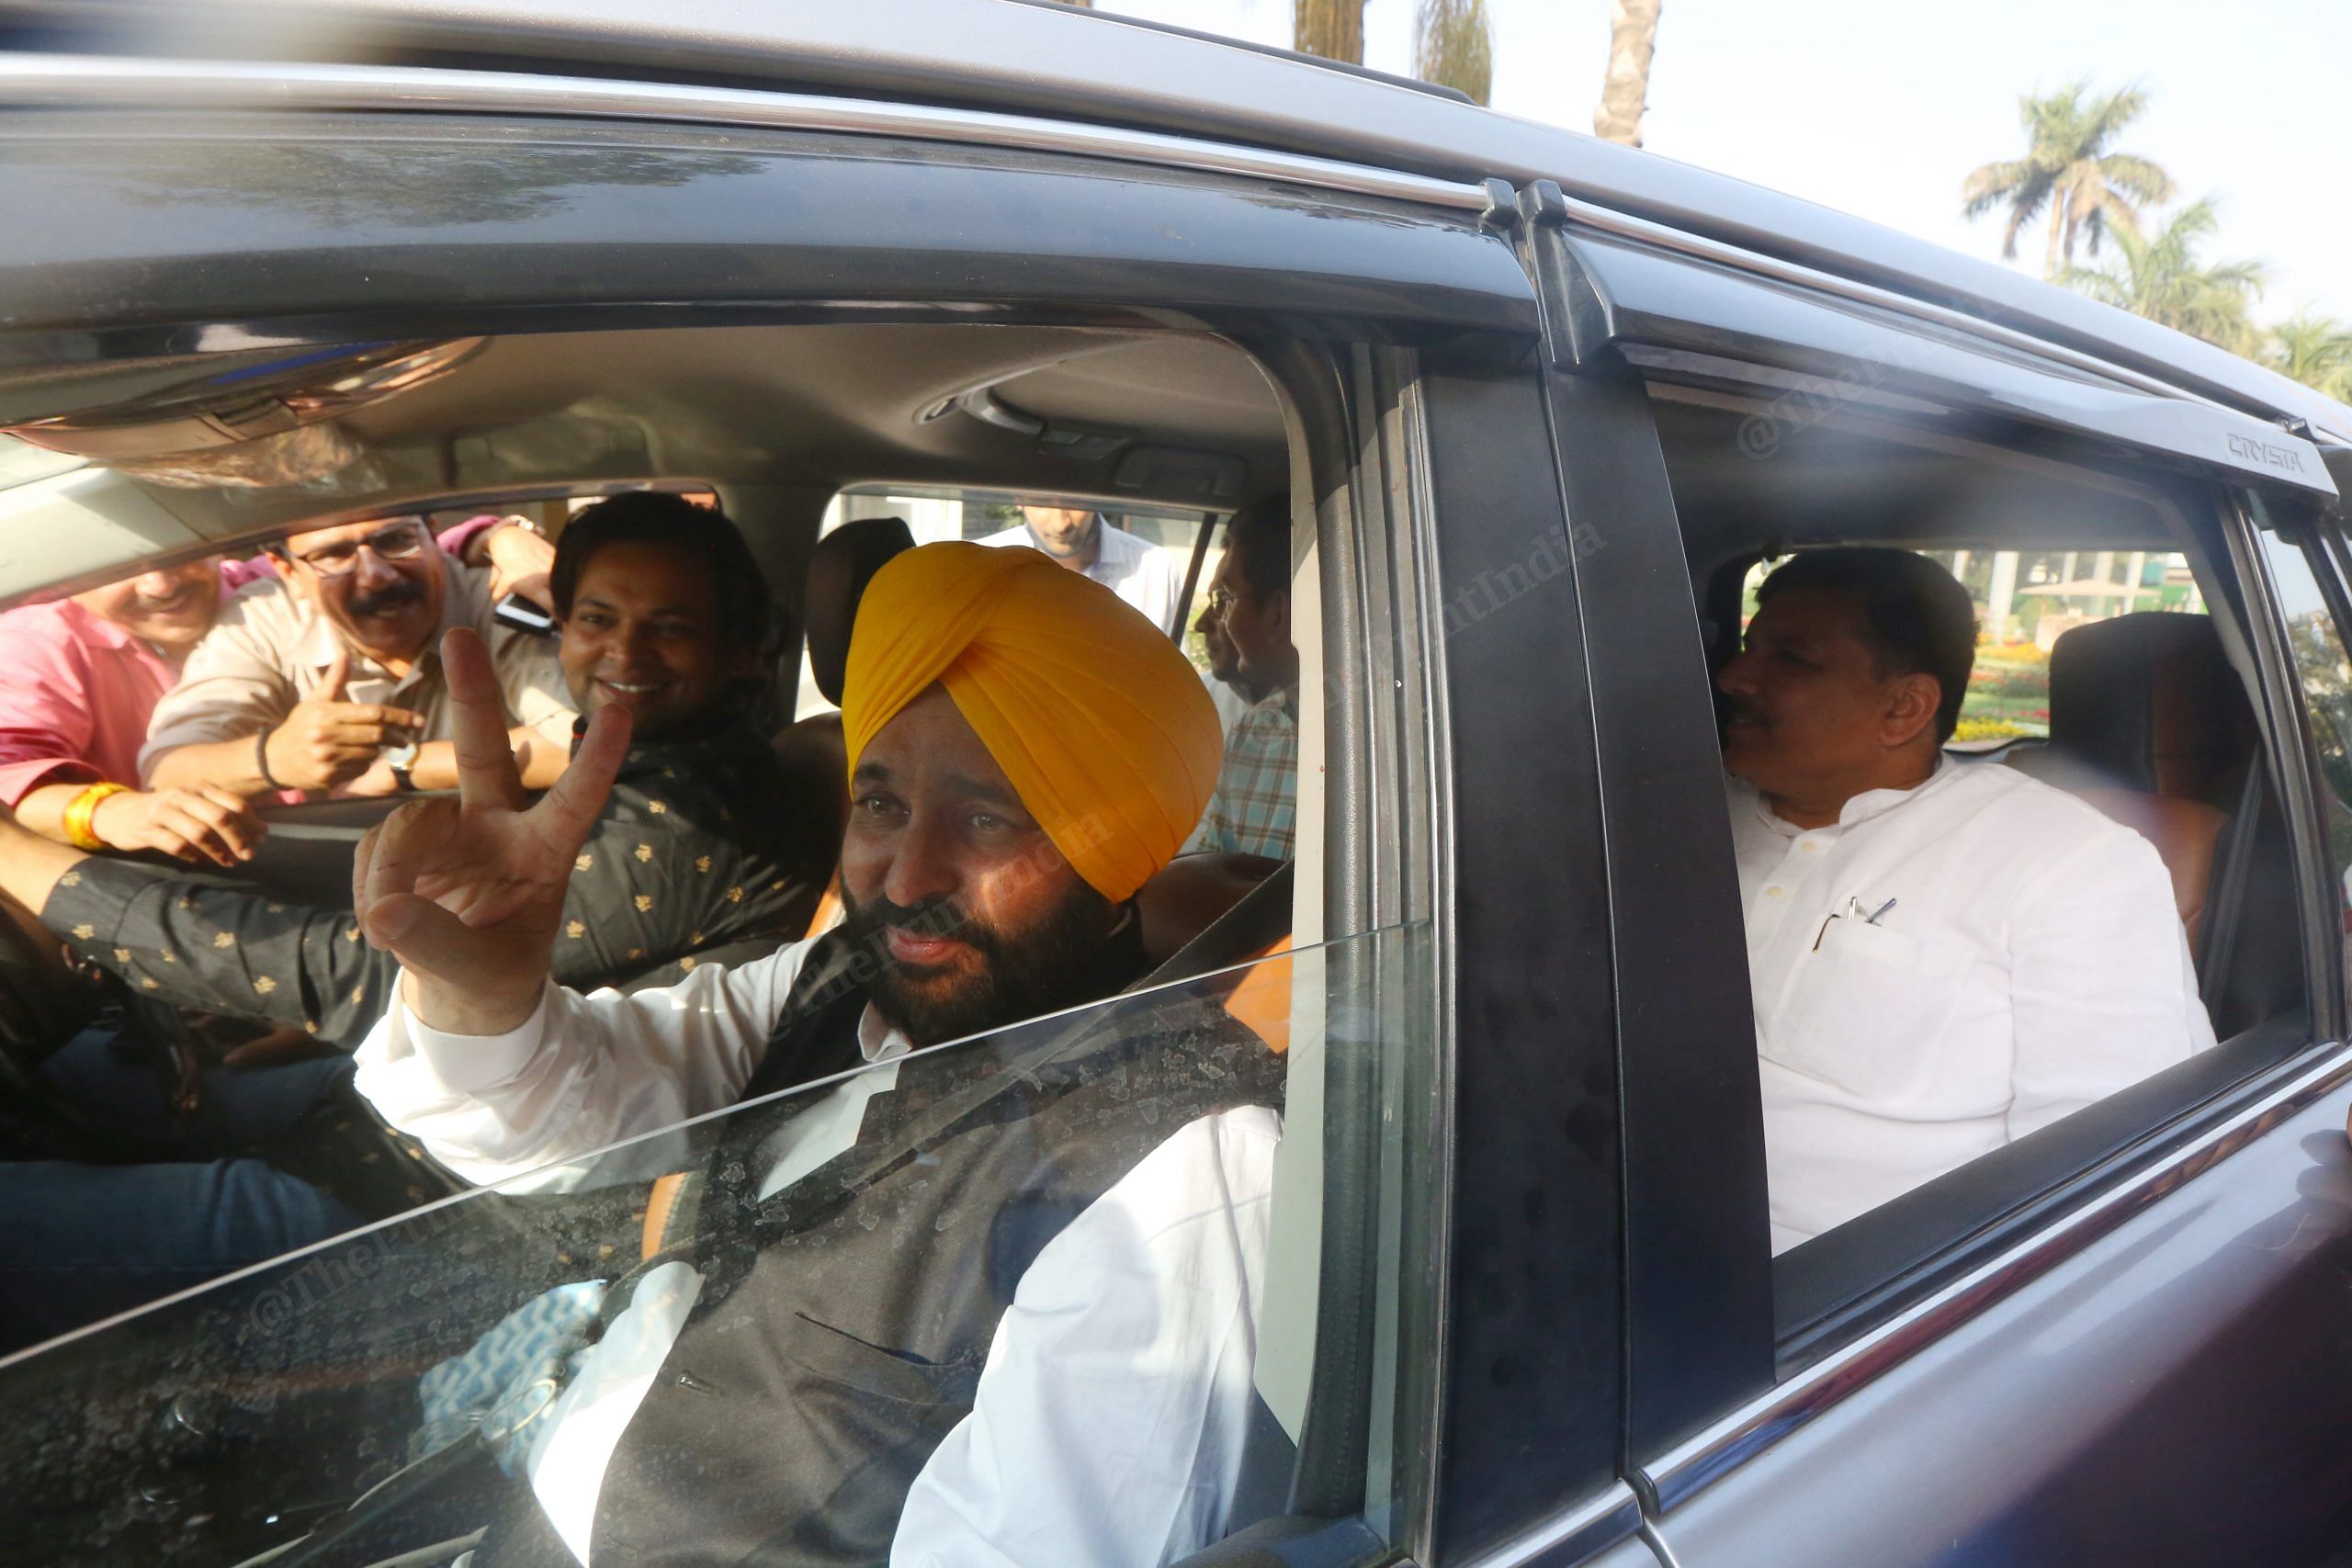 Bhagwant Mann flashes a smile and lifts his fingers in a victory sign | Photo: Praveen Jain | ThePrint